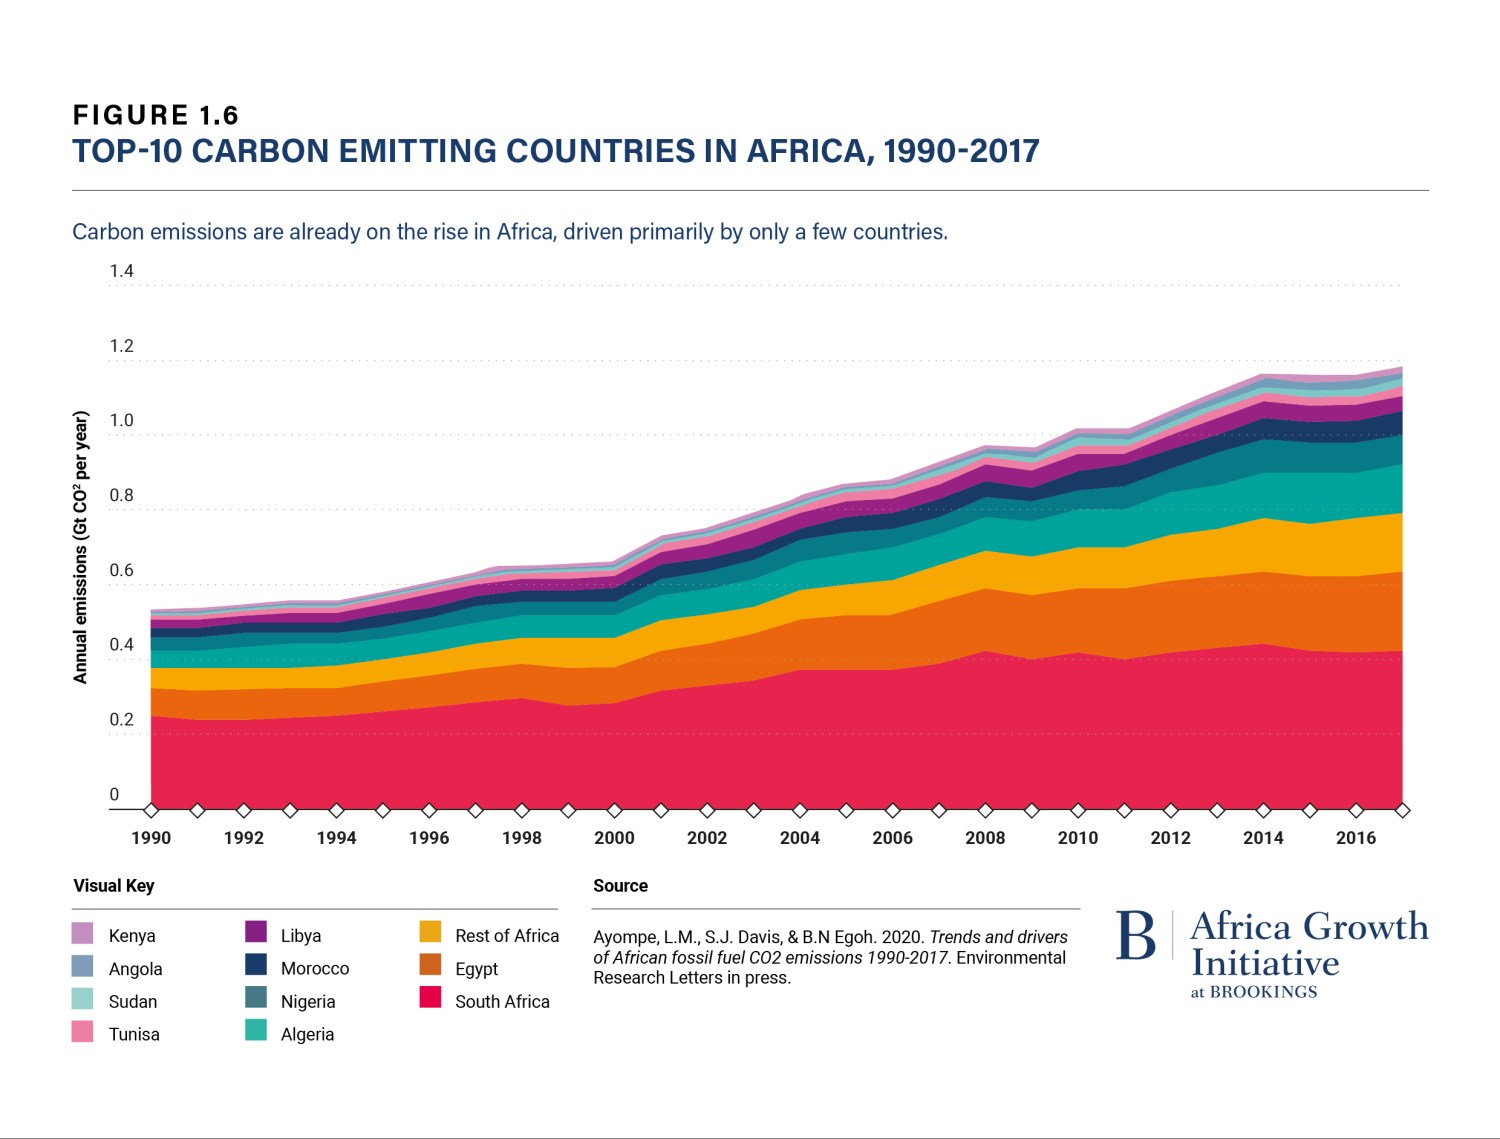 Top 10 carbon-emitting countries in Africa, 1990-2017